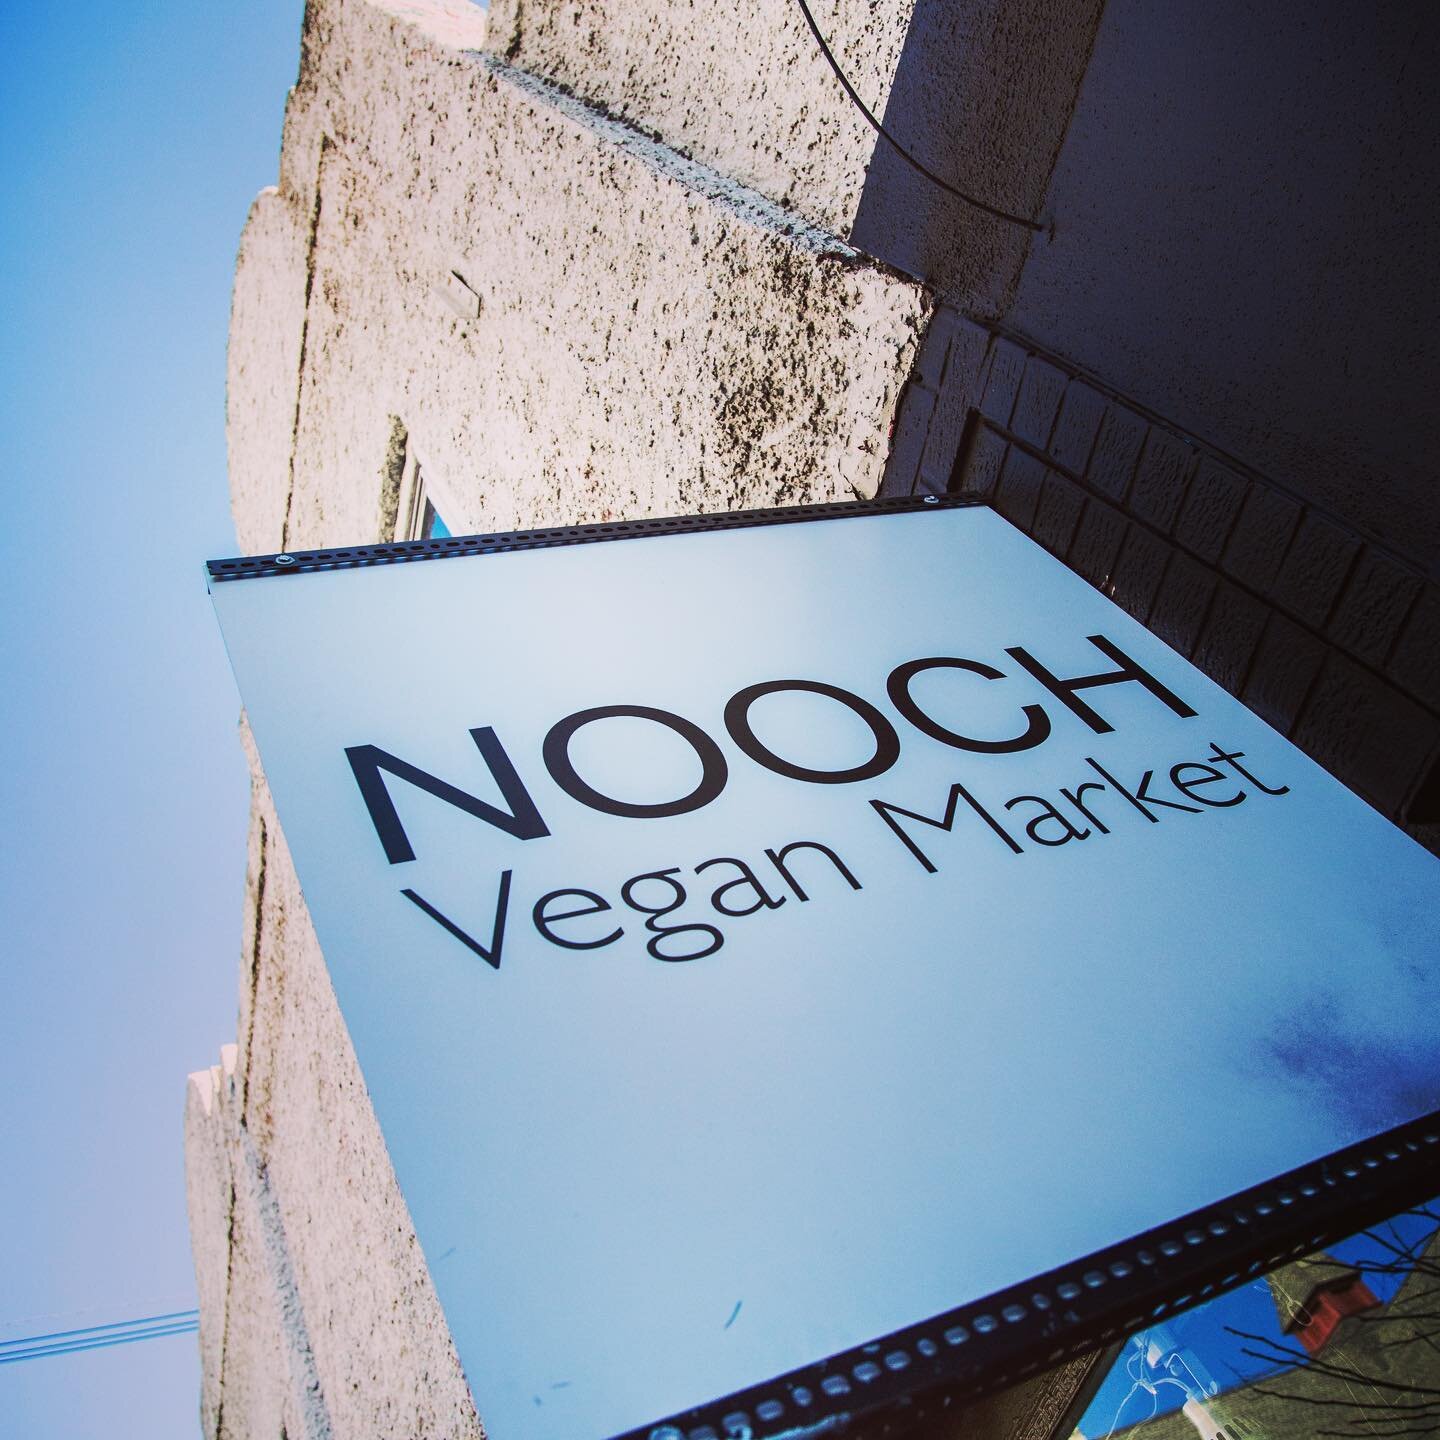 Tomorrow (Sunday) we are demoing at our original, ride or die retailer, @noochveganmarket, from 11AM to 2PM. Bring your #fathers by to taste some of our #local #colorado #oatmilk.